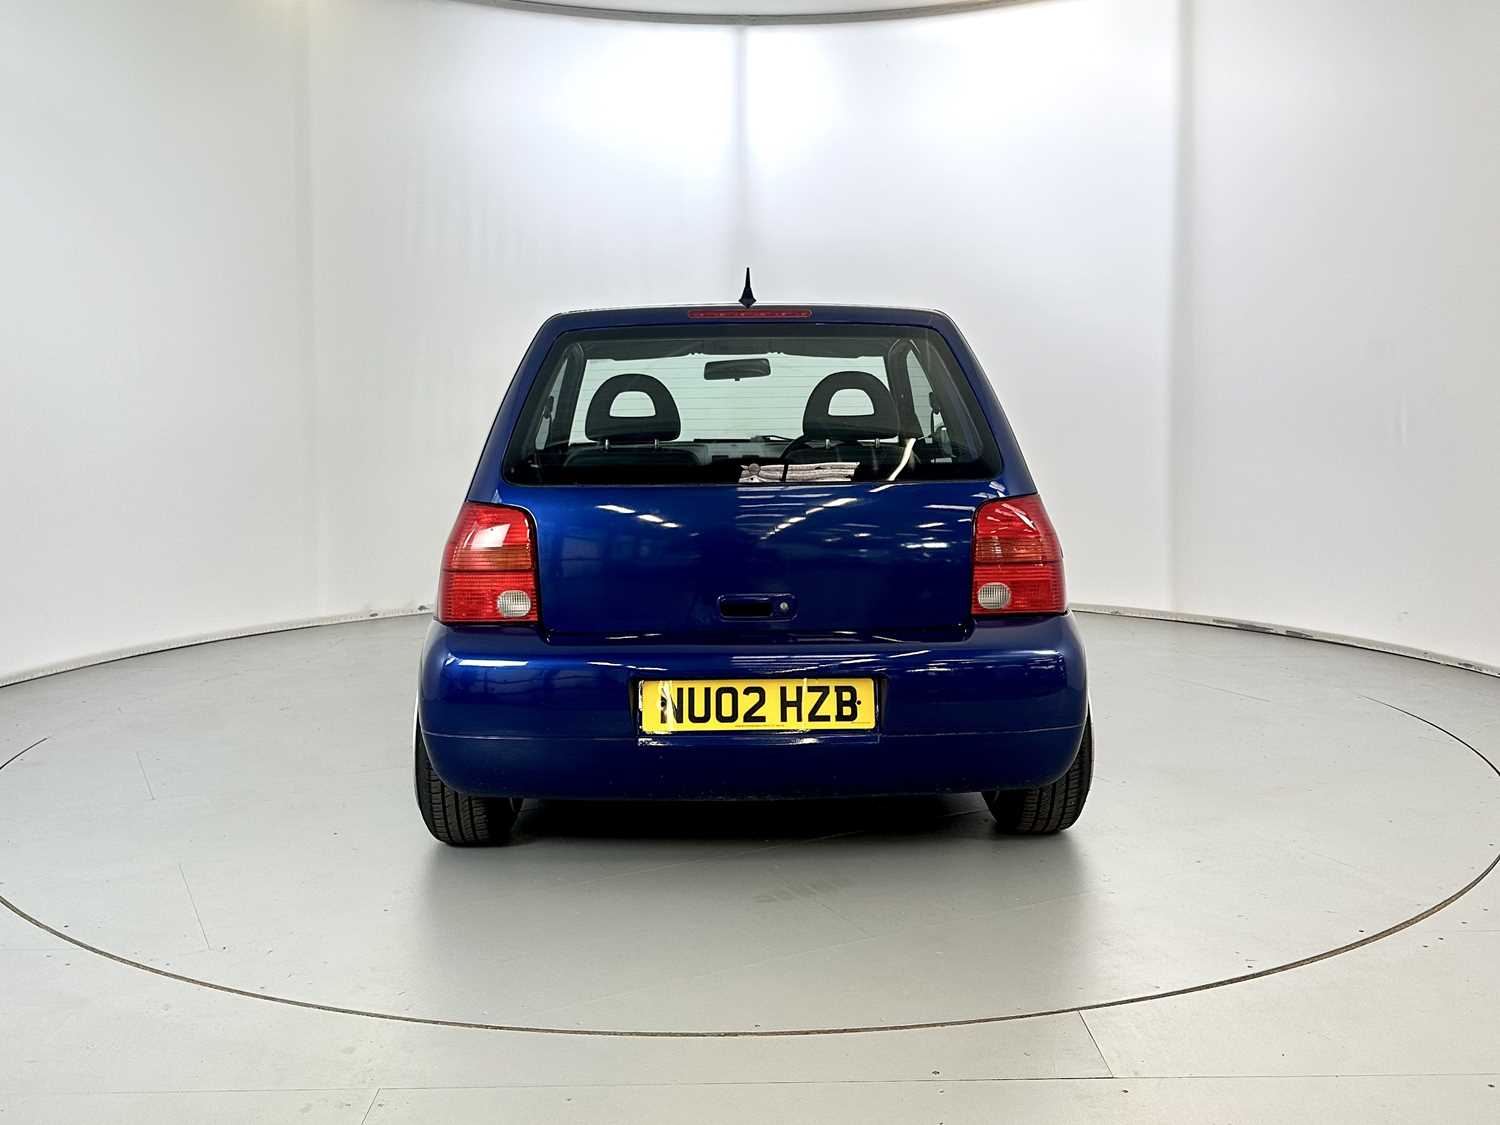 2002 Volkswagen Lupo - Image 8 of 28